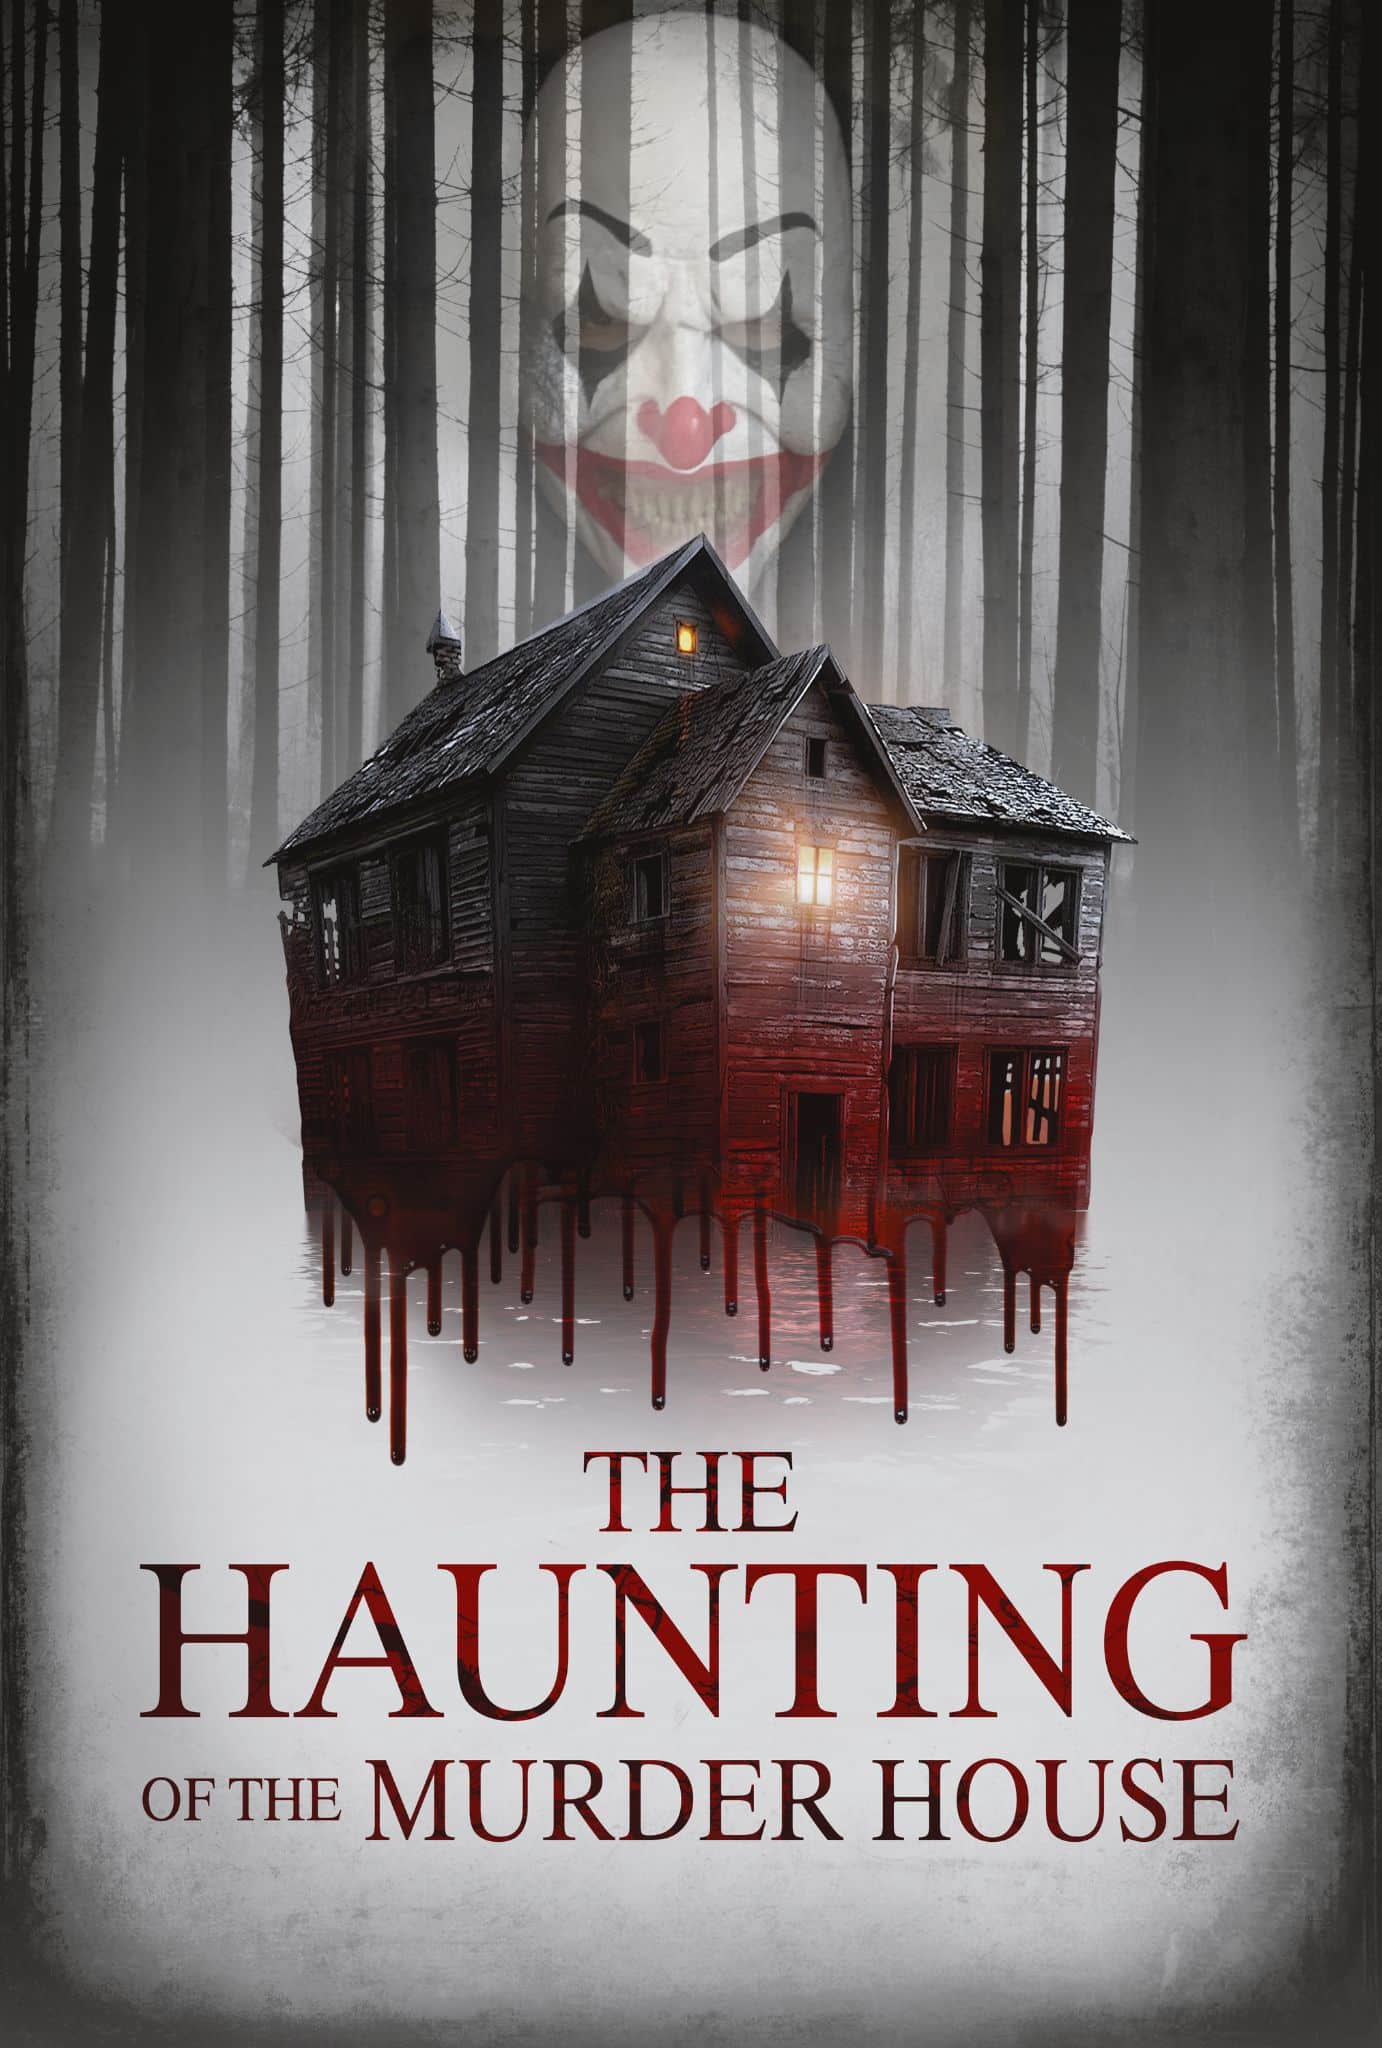 The Haunting of the Murder House - Teaser Poster